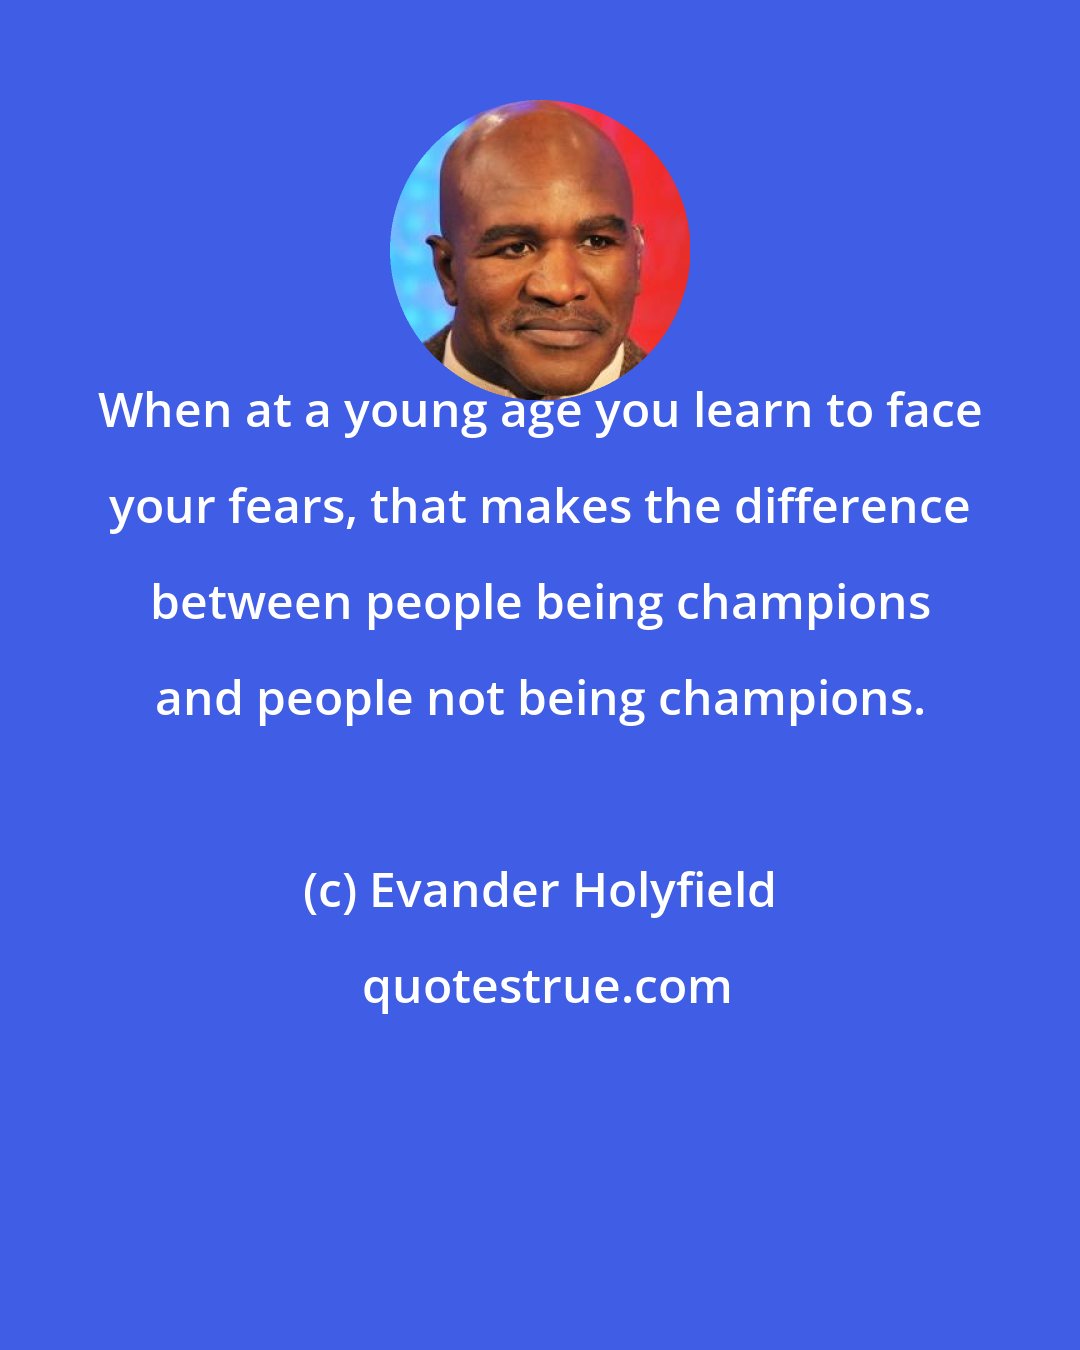 Evander Holyfield: When at a young age you learn to face your fears, that makes the difference between people being champions and people not being champions.